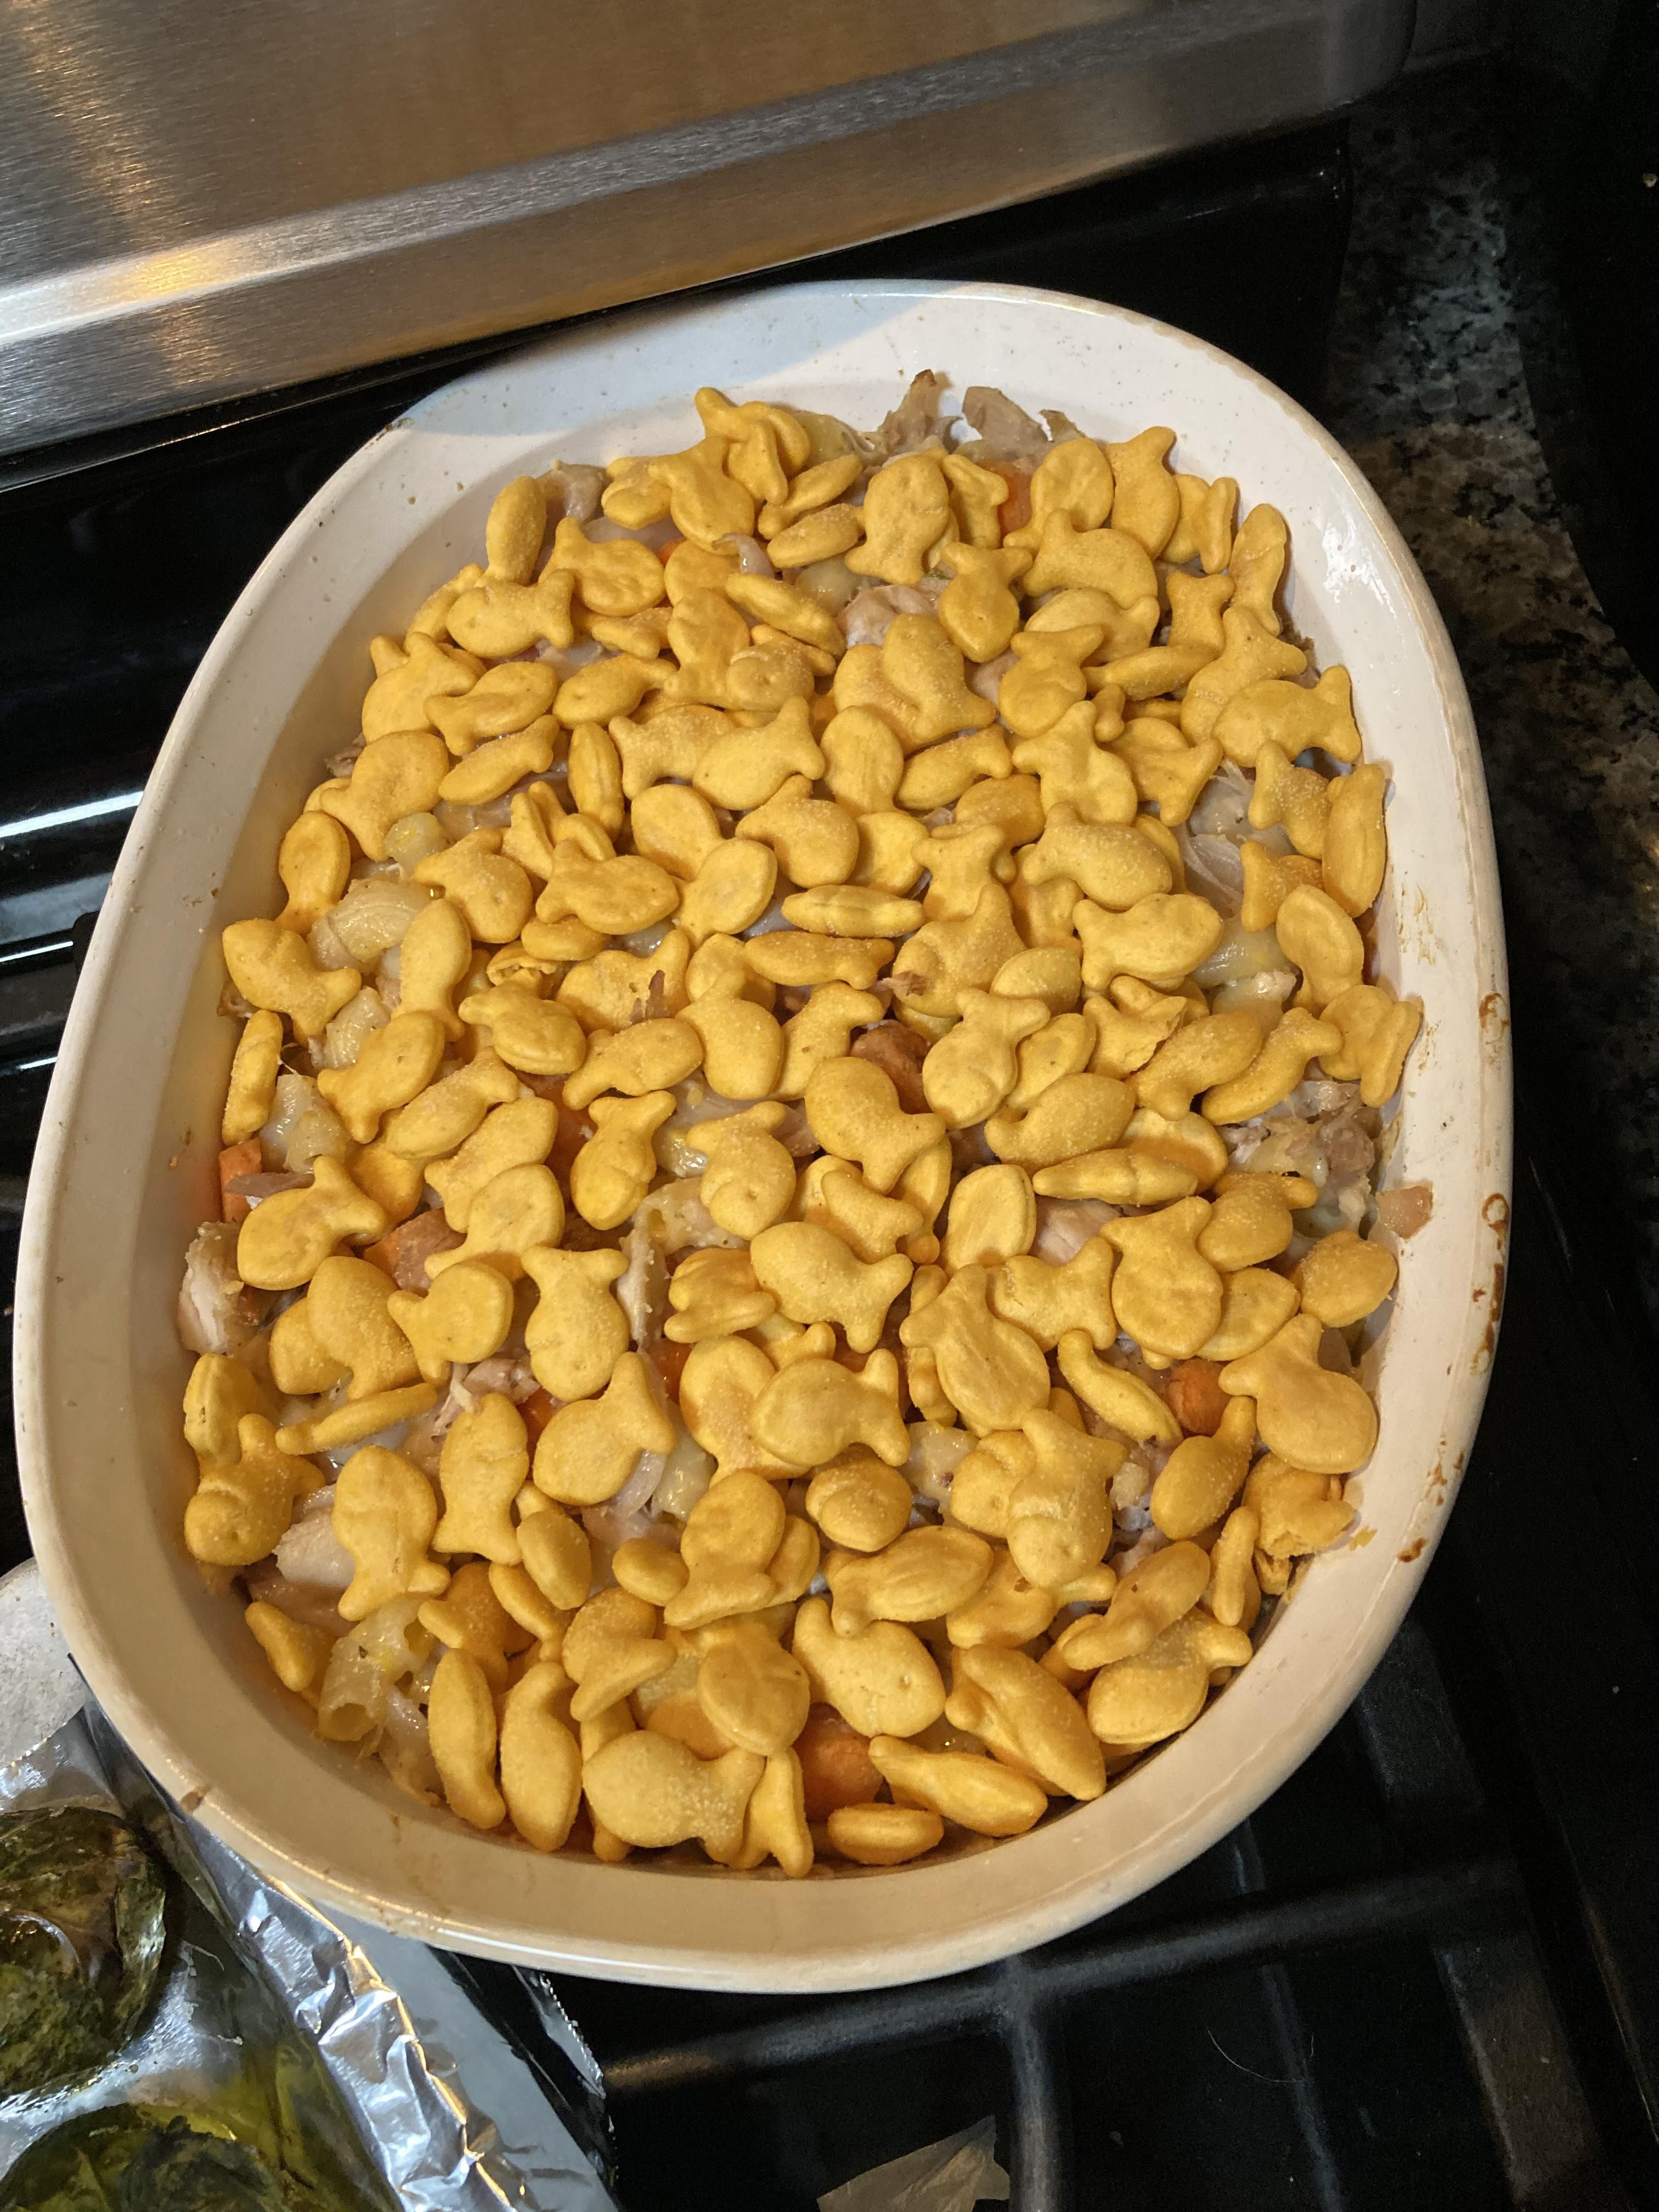 Husband's turn to cook...I pop in the kitchen for a moment...he says we are out of breadcrumbs. No problem, I say, you can use crackers as a substitute